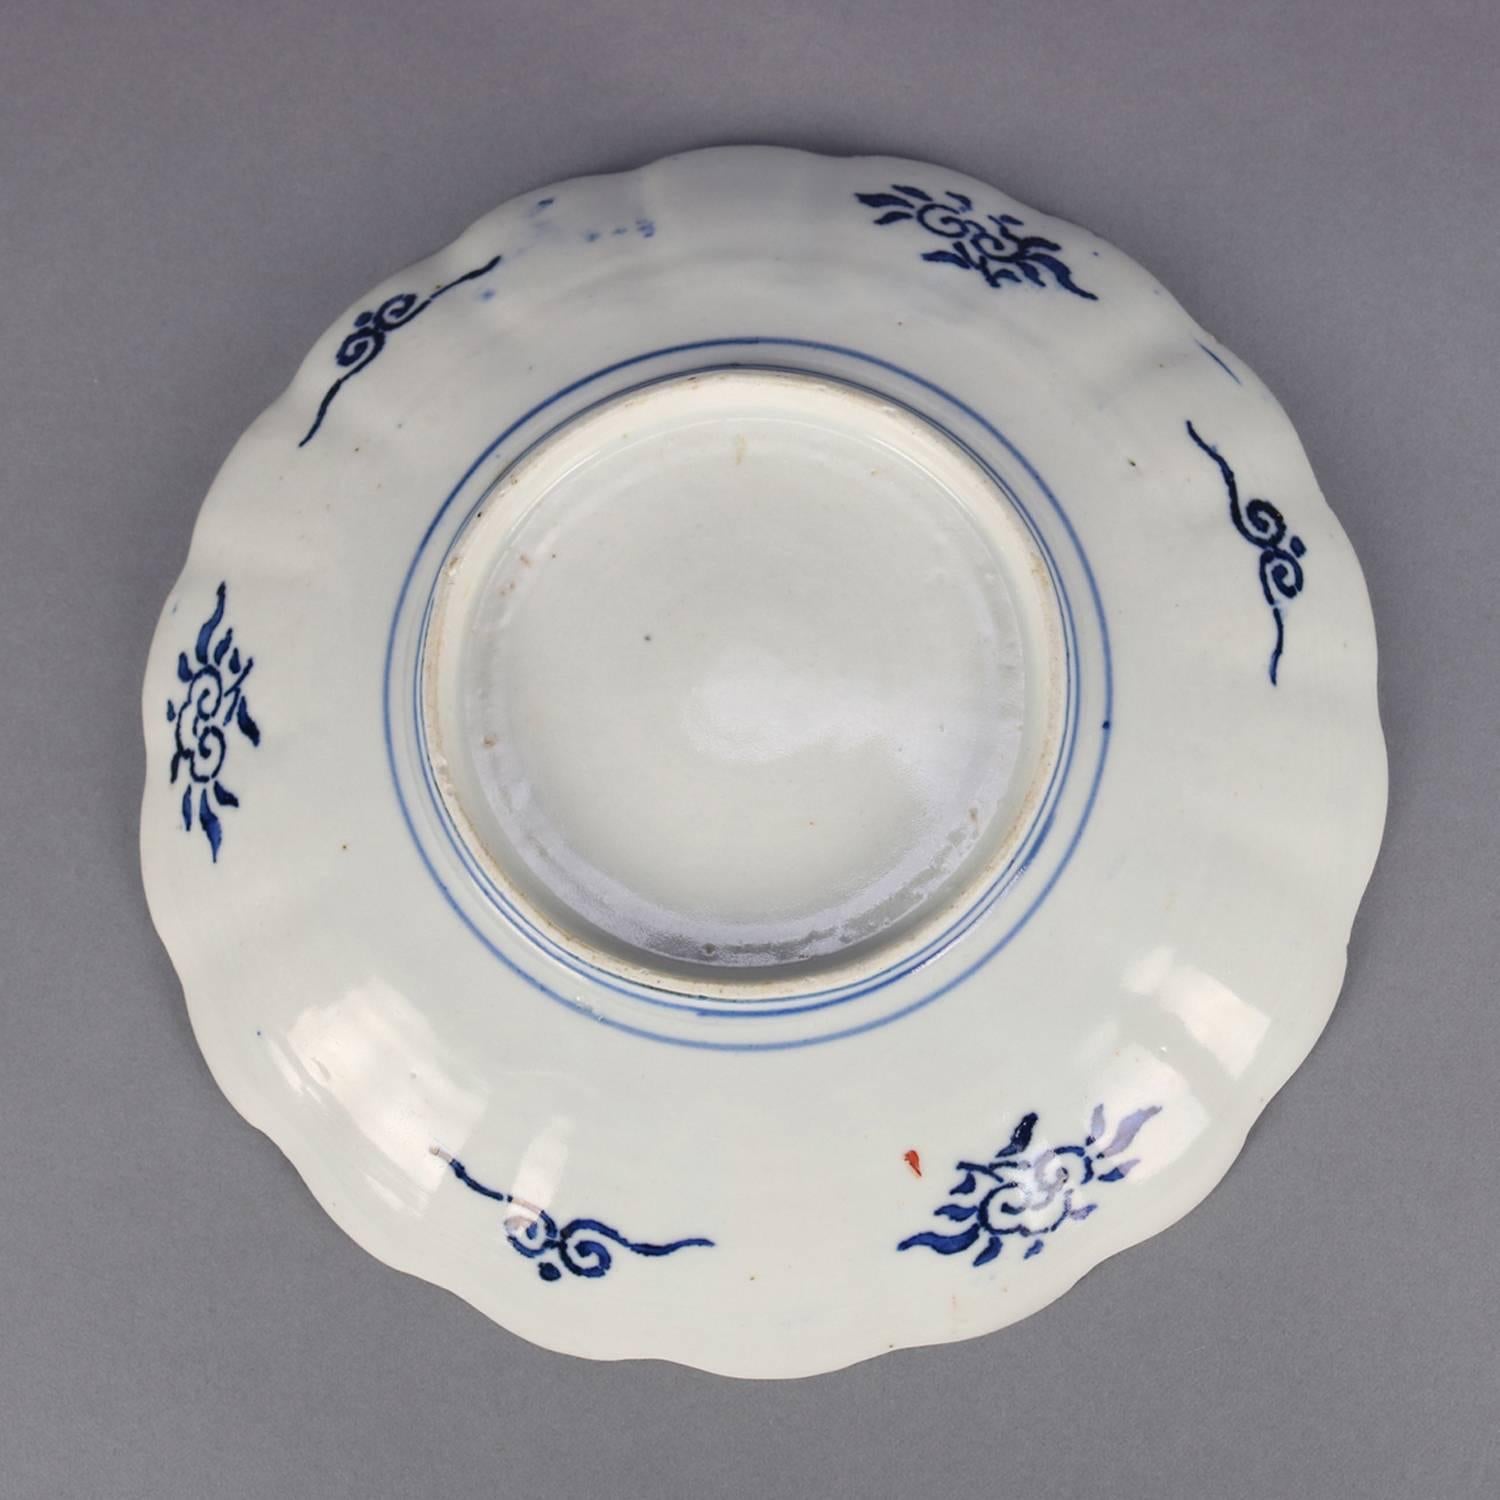 Five Antique Japanese Meiji Imari porcelain features plates with scalloped rims with alternating hand-painted reserves of garden, floral and stylized fish scales surrounding central reserve of urn with flowers, en verso blue decoration; set includes